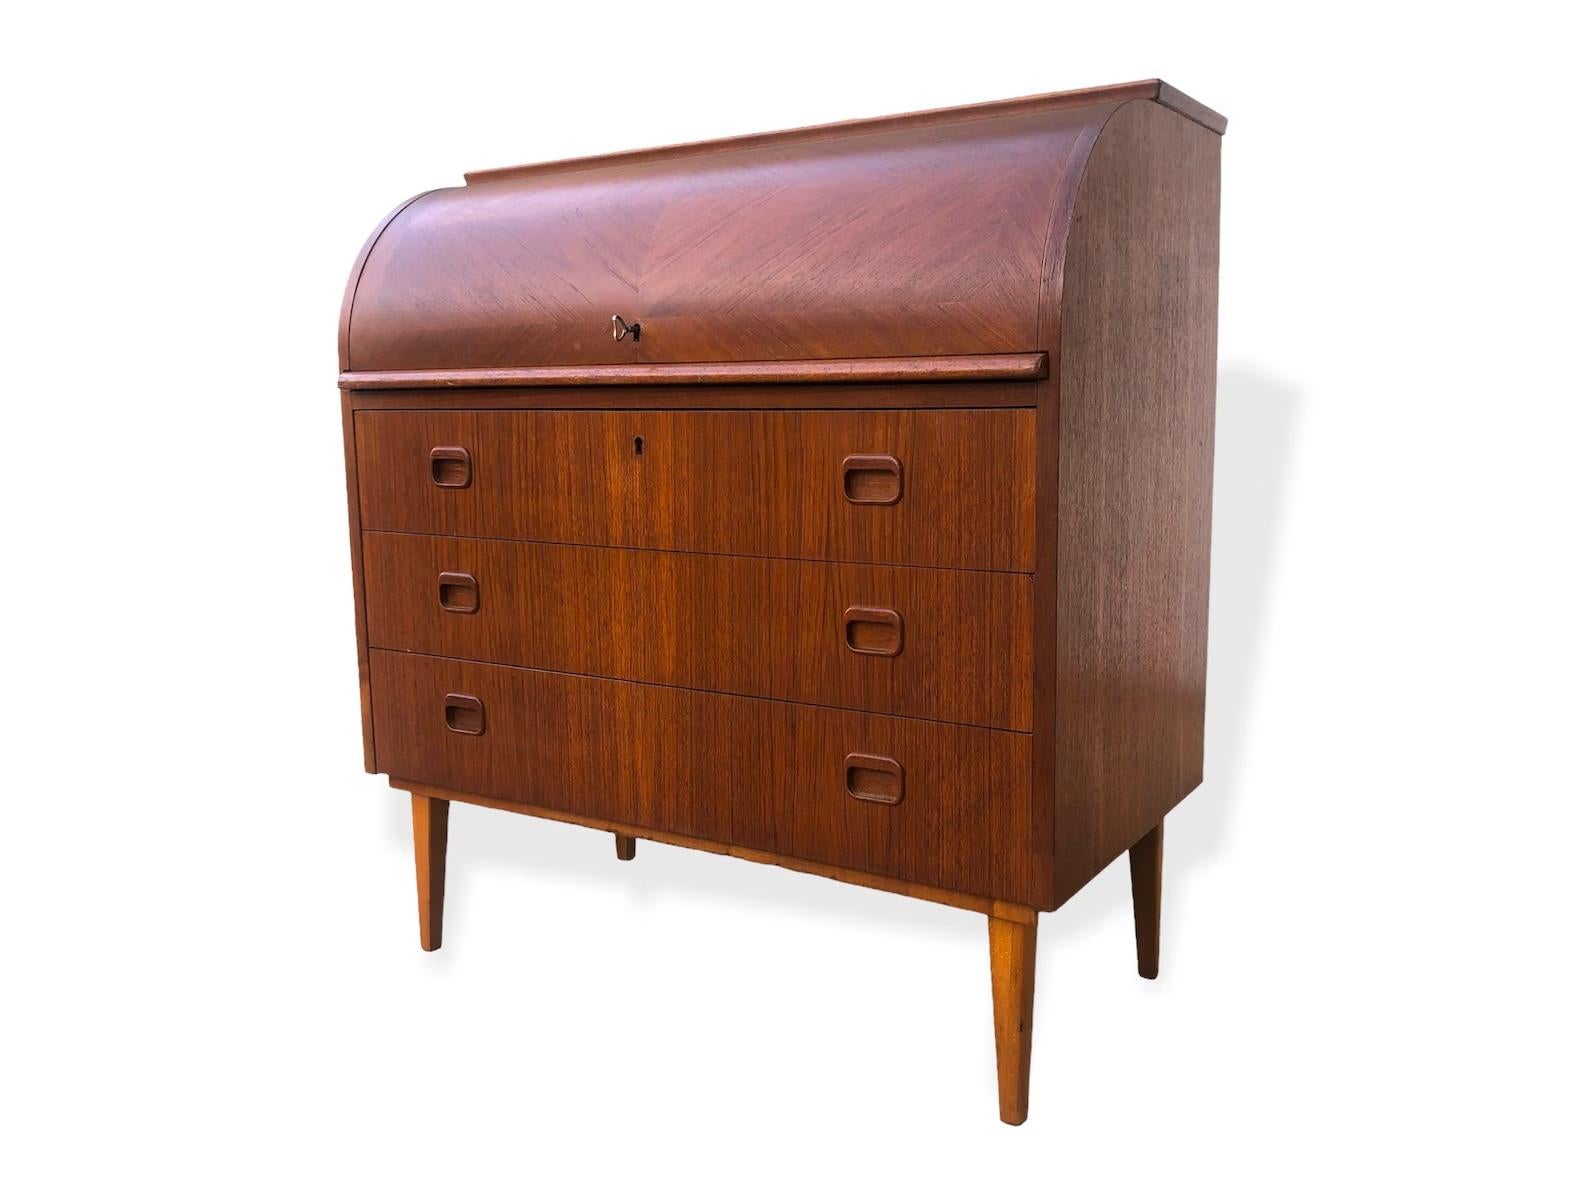 This iconic midcentury Swedish modern Egon Ostergaard teak cylinder rolltop secretary desk cabinet is circa 1960. The Classic Scandinavian Modern design has clean, Minimalist lines and gentle curves. Wood tone is deep and rich with beautiful natural